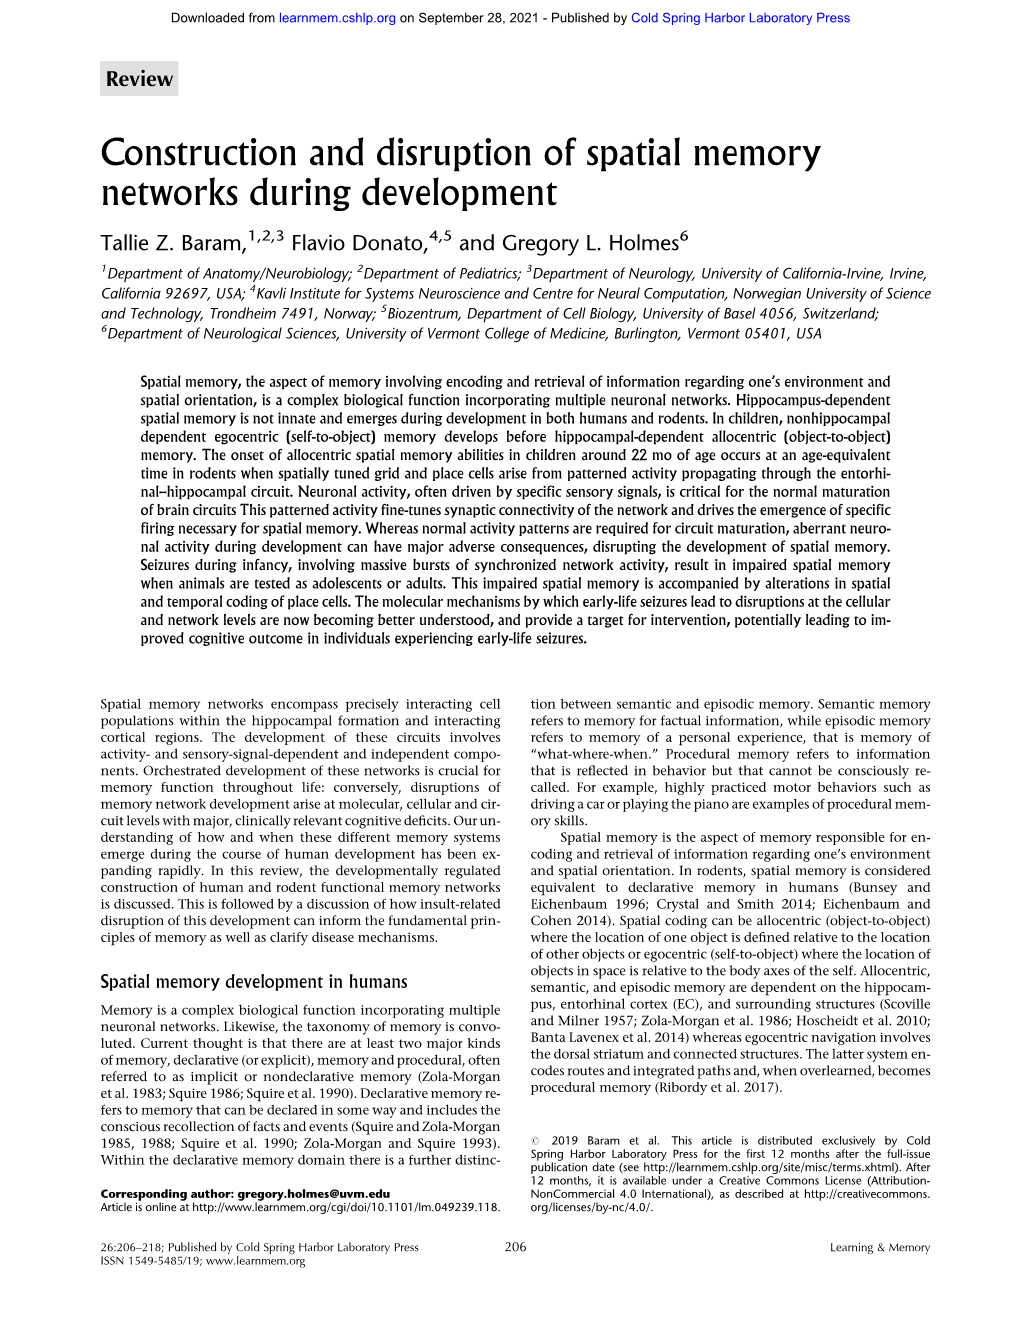 Construction and Disruption of Spatial Memory Networks During Development